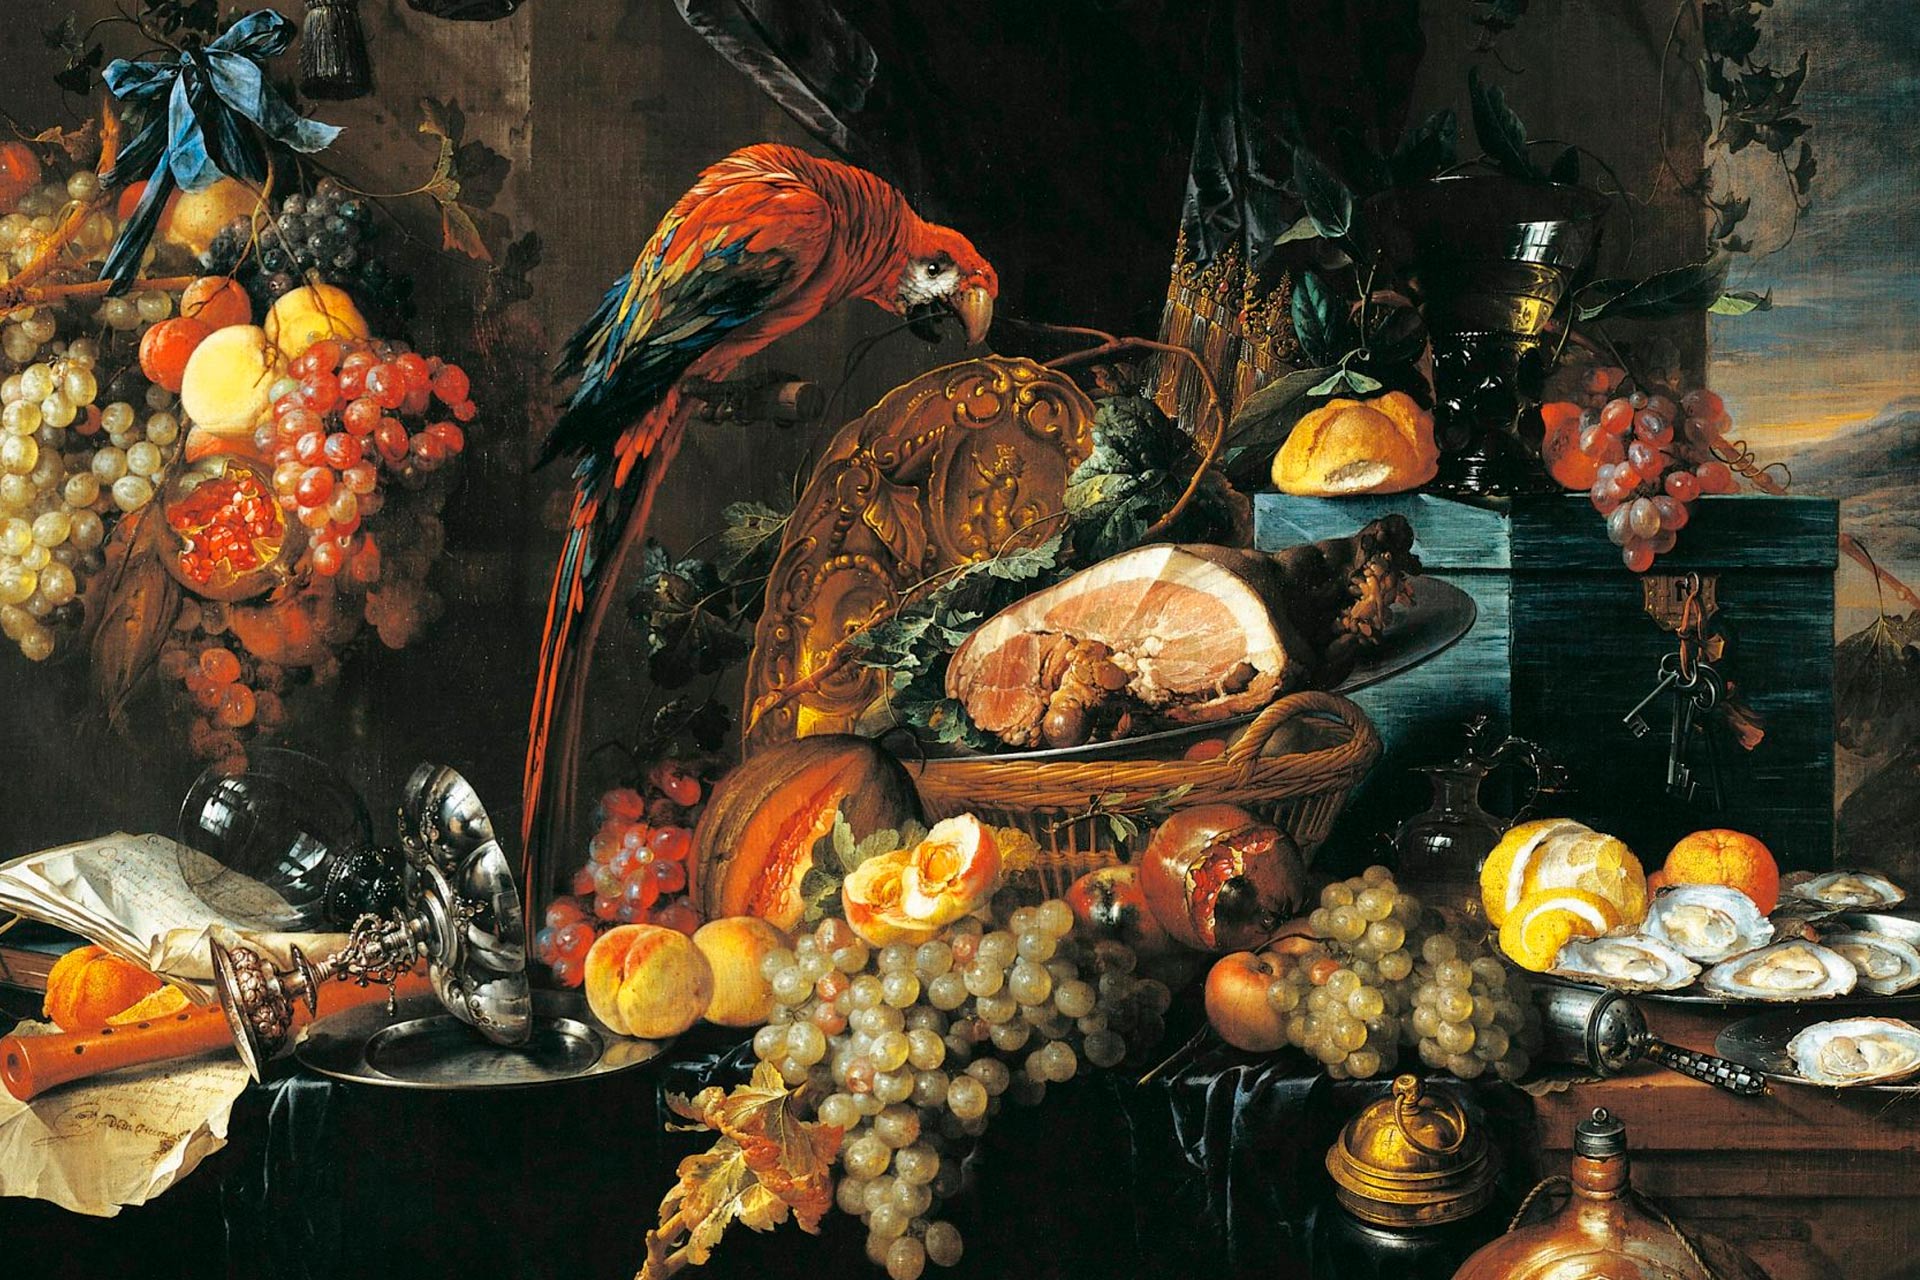 Two exquisite recipes from the kitchen of the Italian Renaissance.